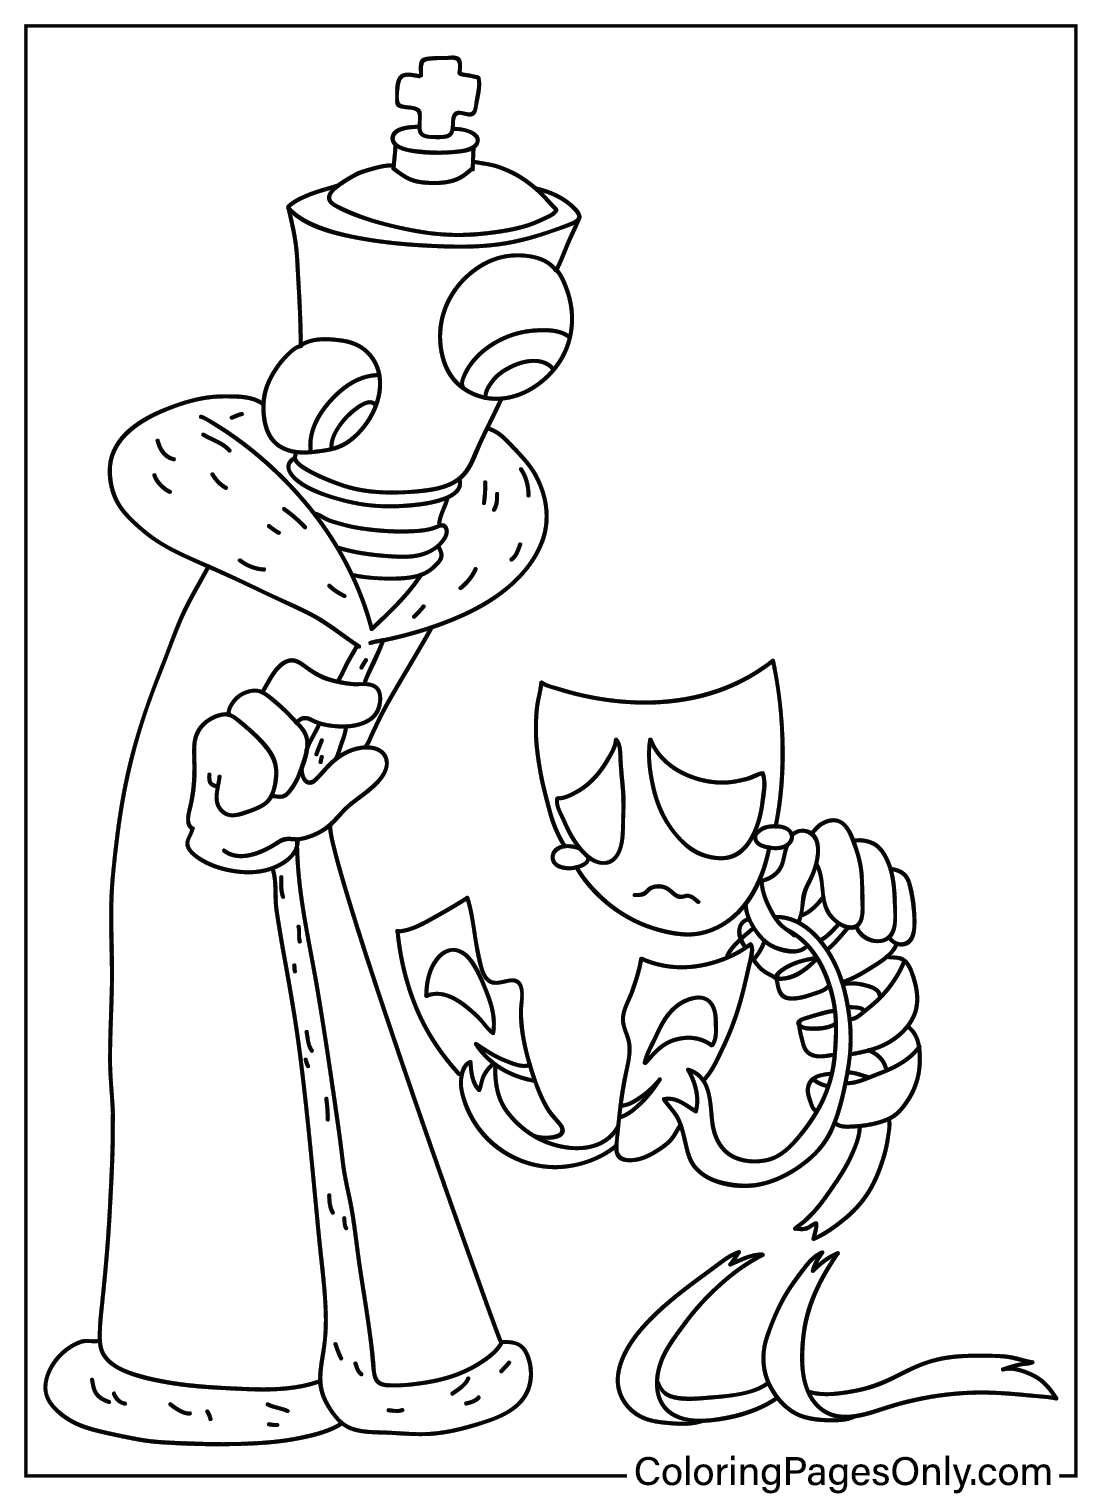 Kinger, Gangle Coloring Page from The Amazing Digital Circus